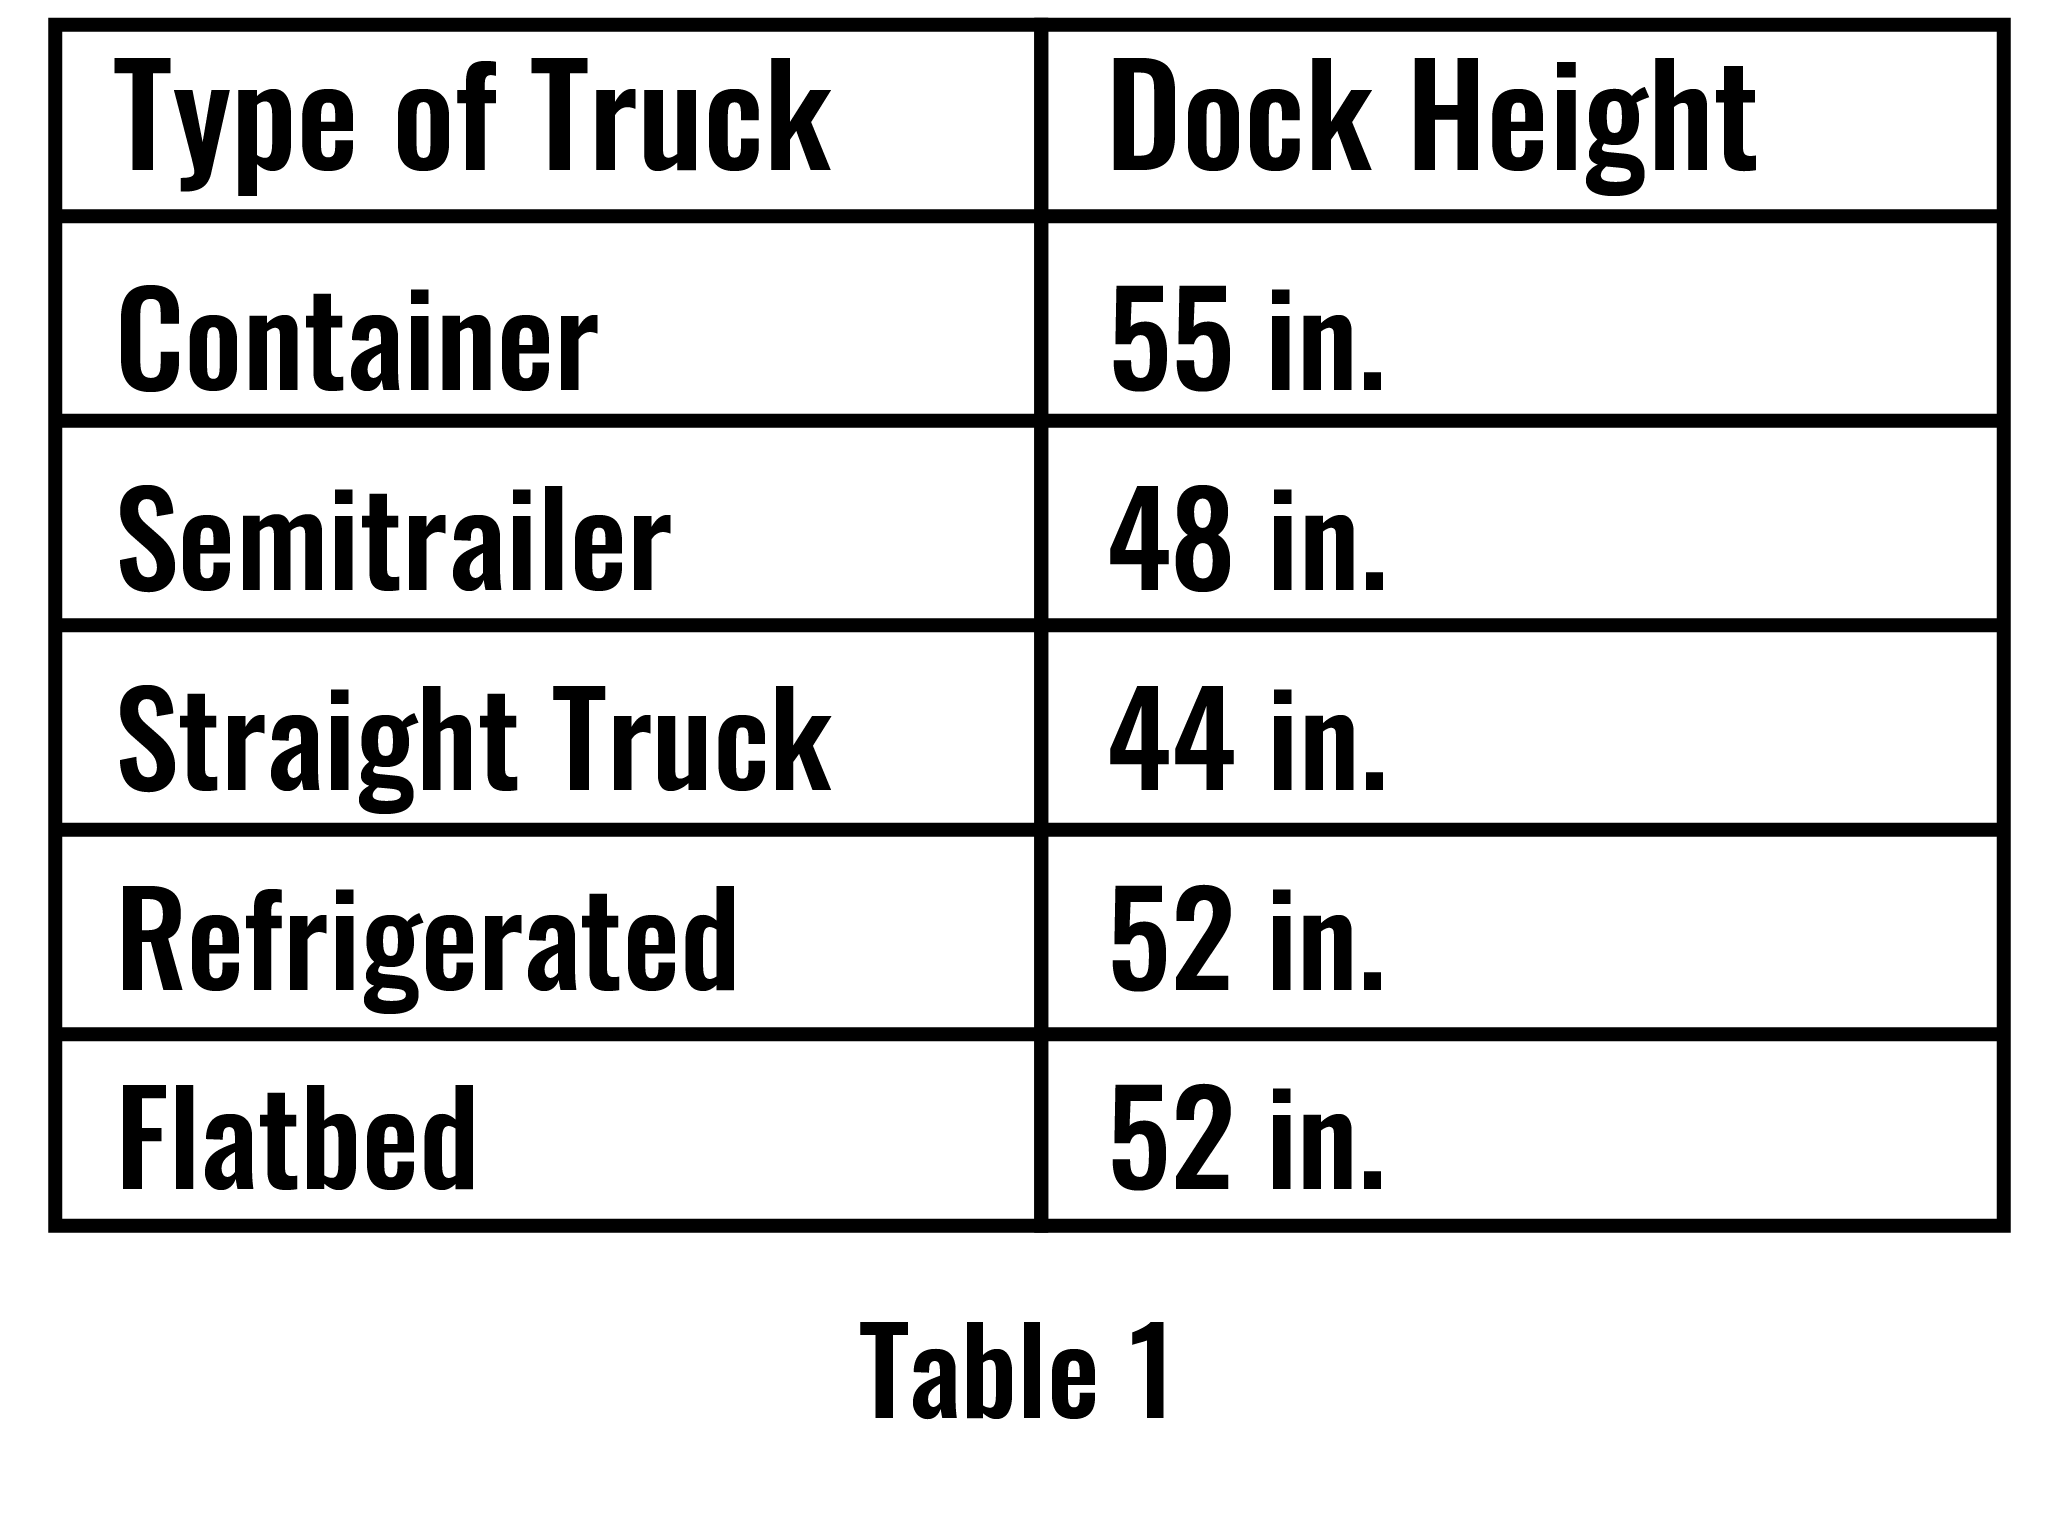 Text Table Comparing Type of Truck and Dock Height